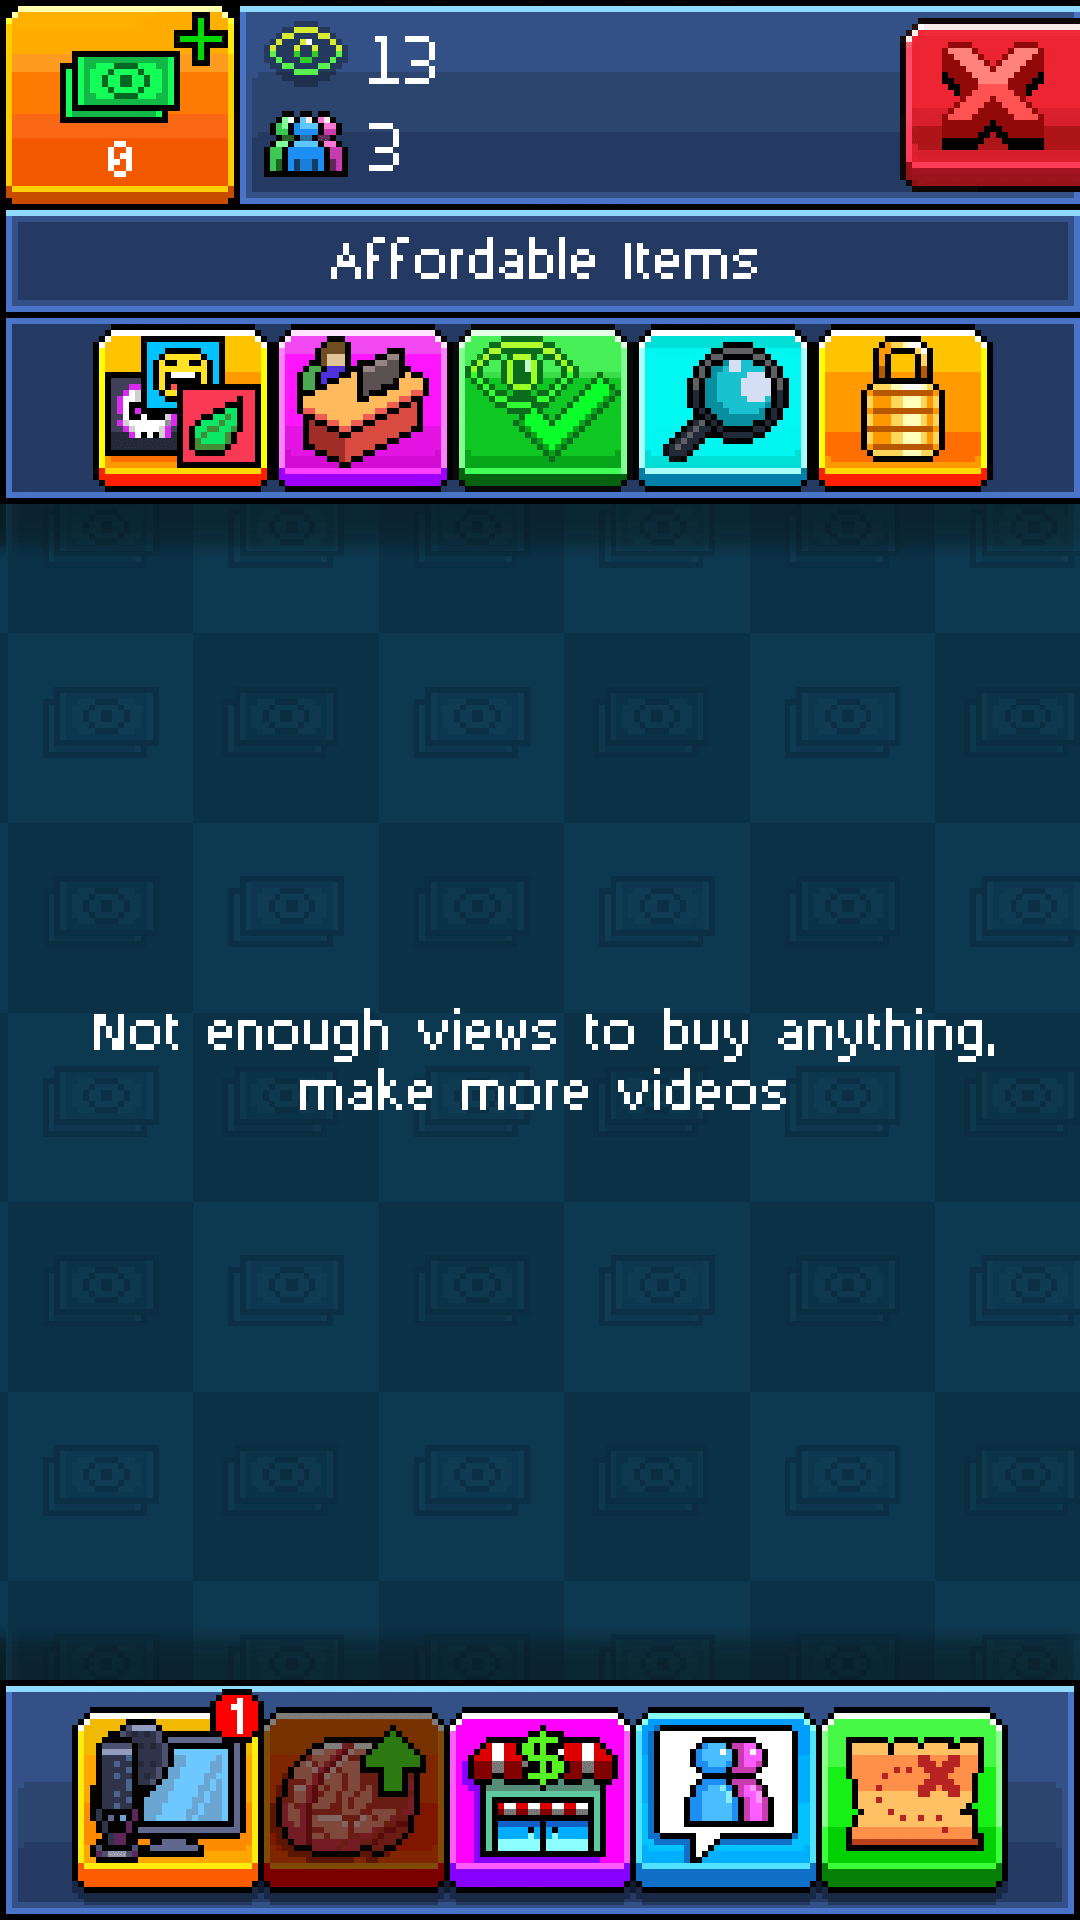 More videos and more views enable you to buy more stuff